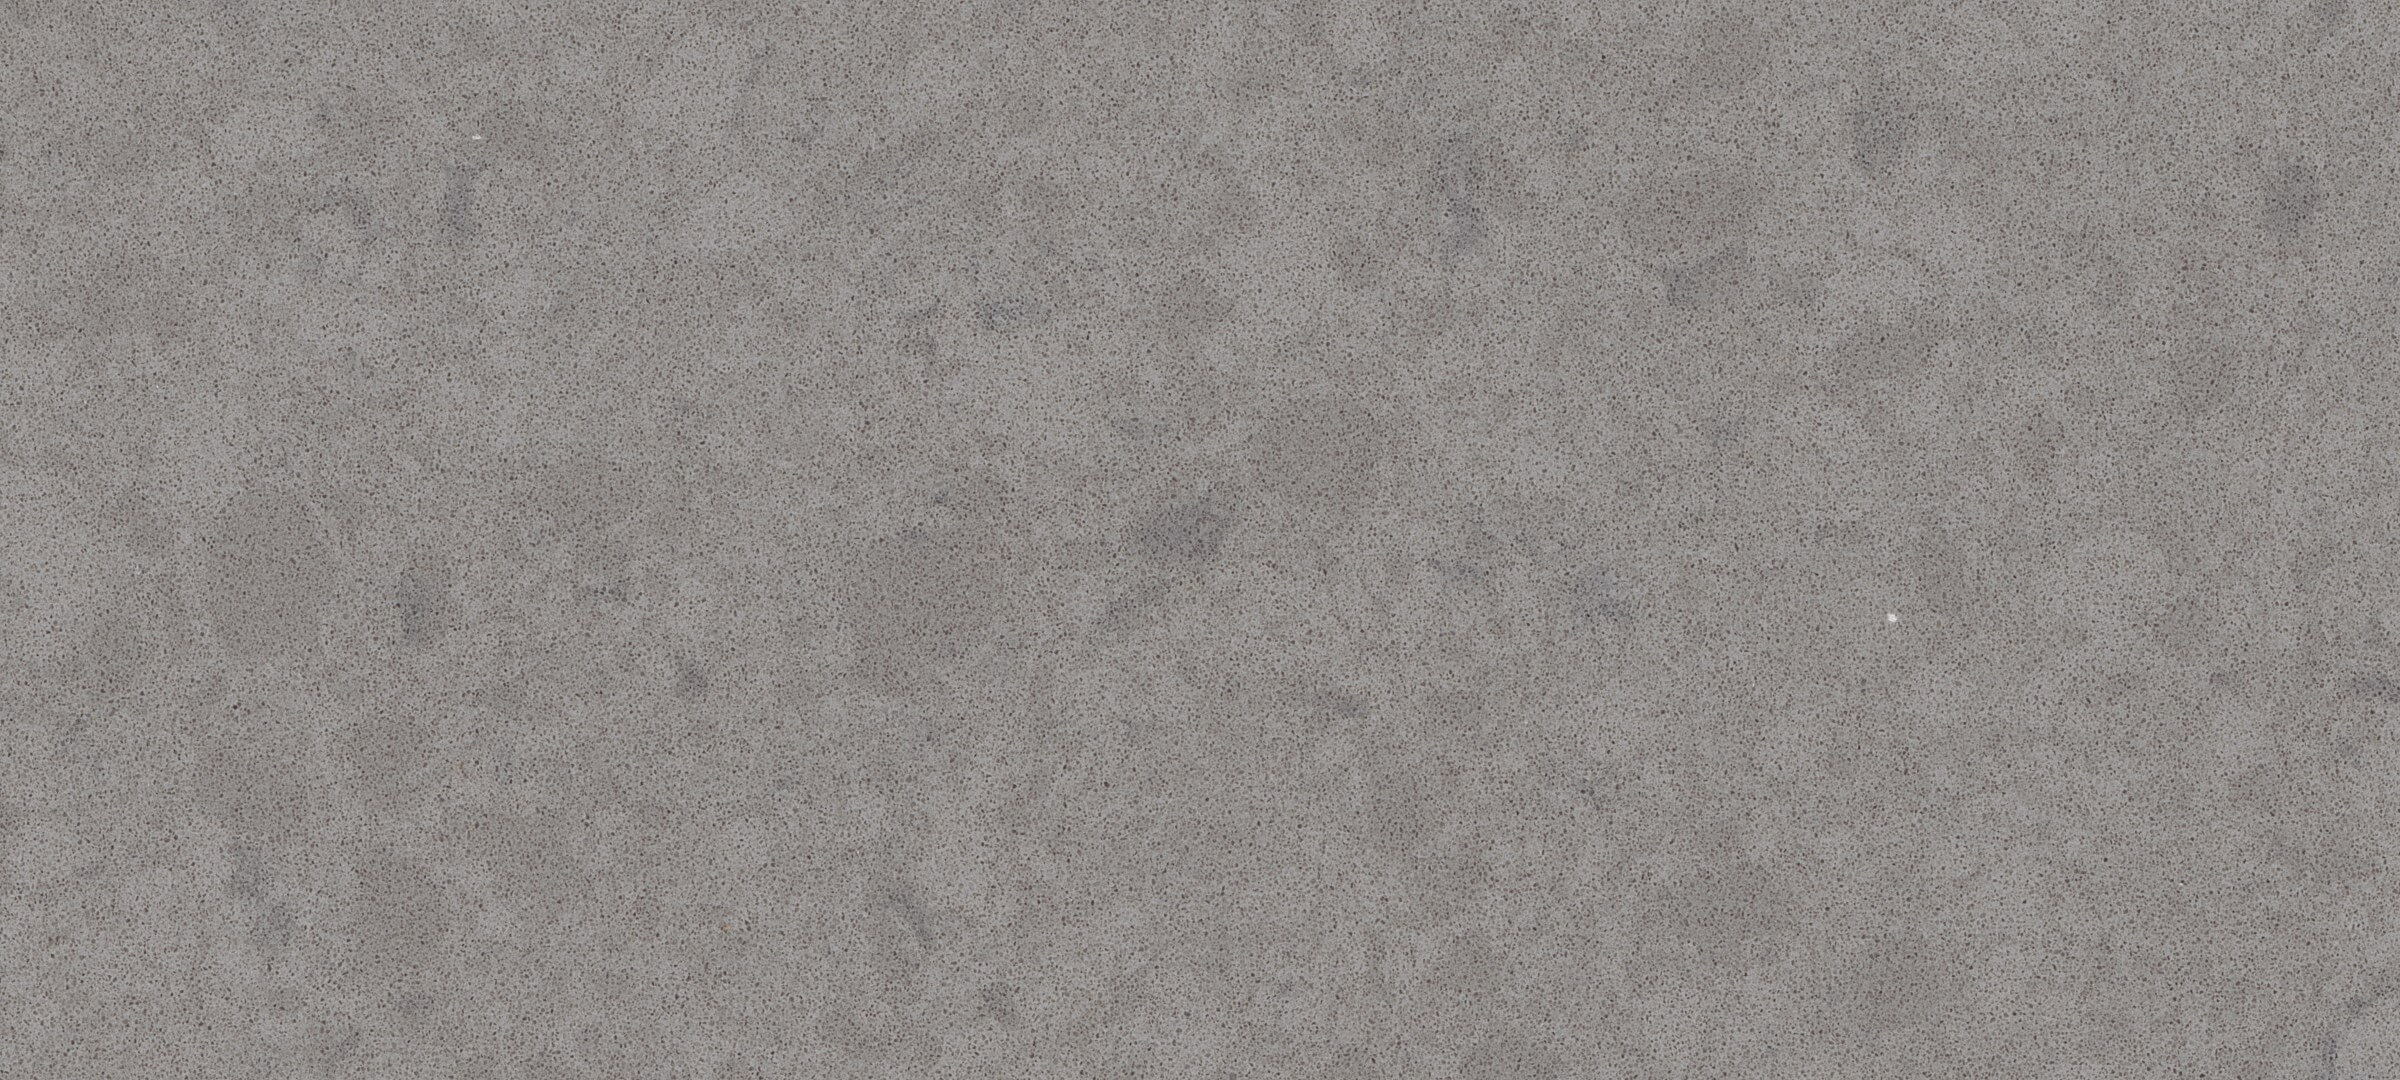 Caesarstone_Oyster_4030_Material (1)